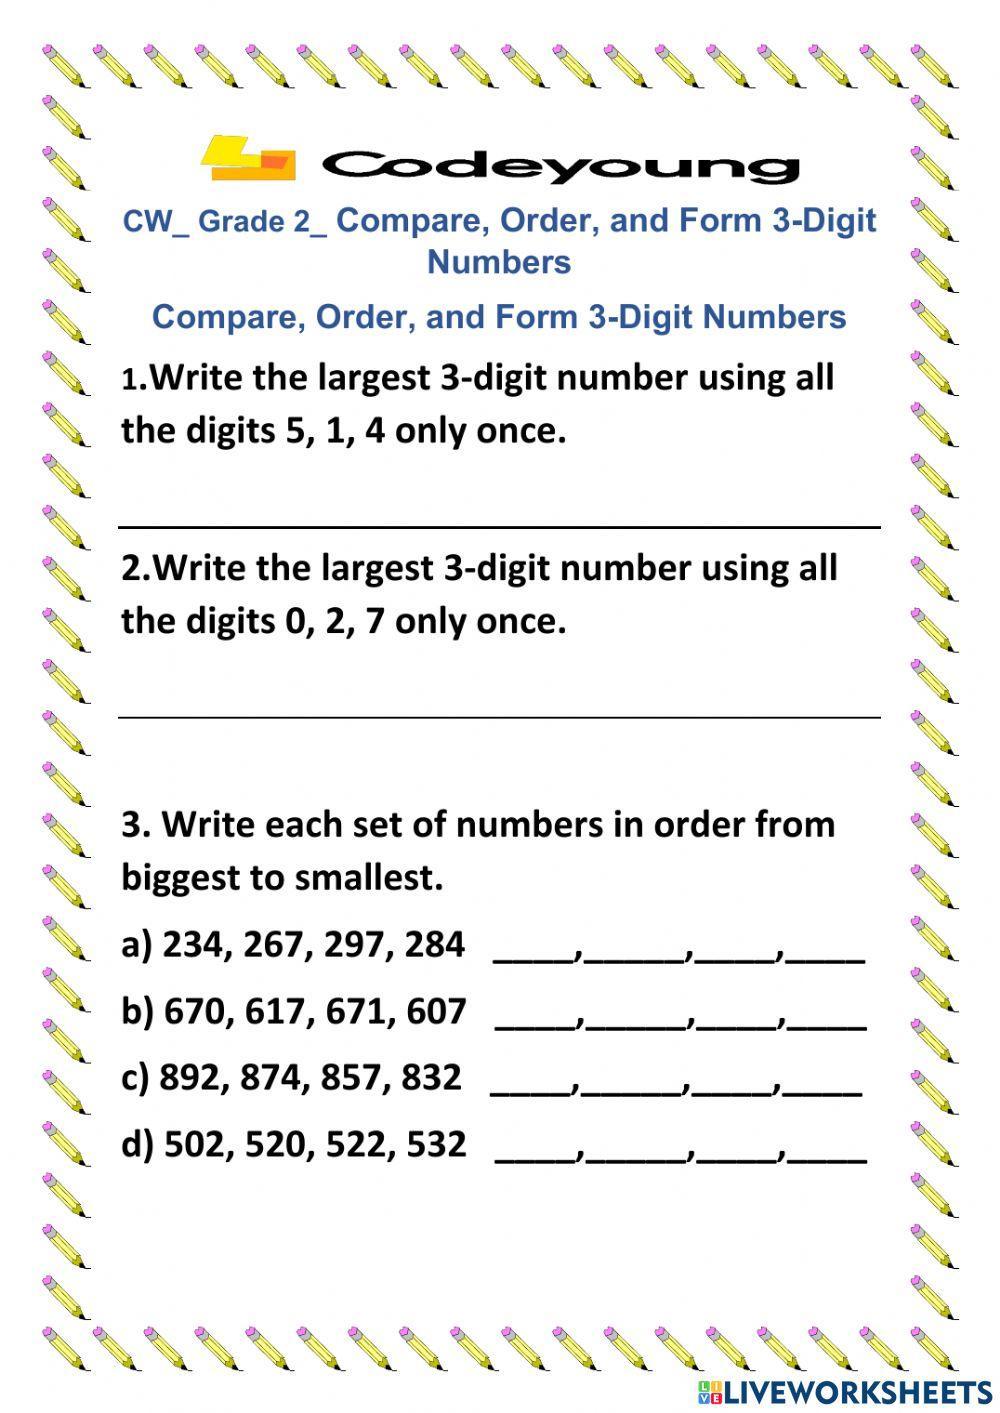 Compare, Order, and Form 3-Digit Numbers